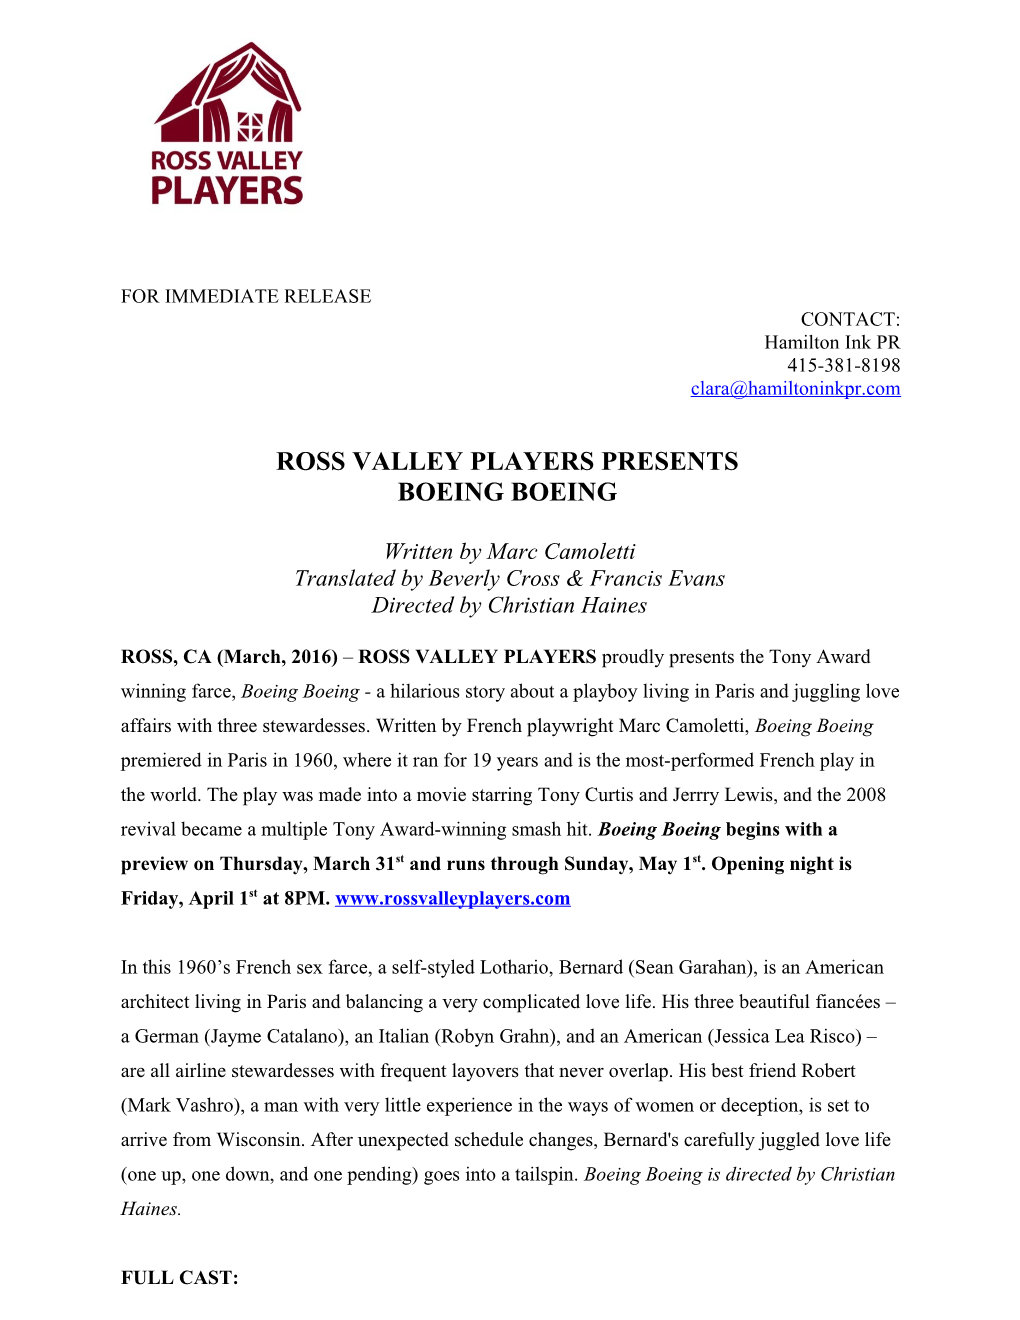 Ross Valley Players Presents